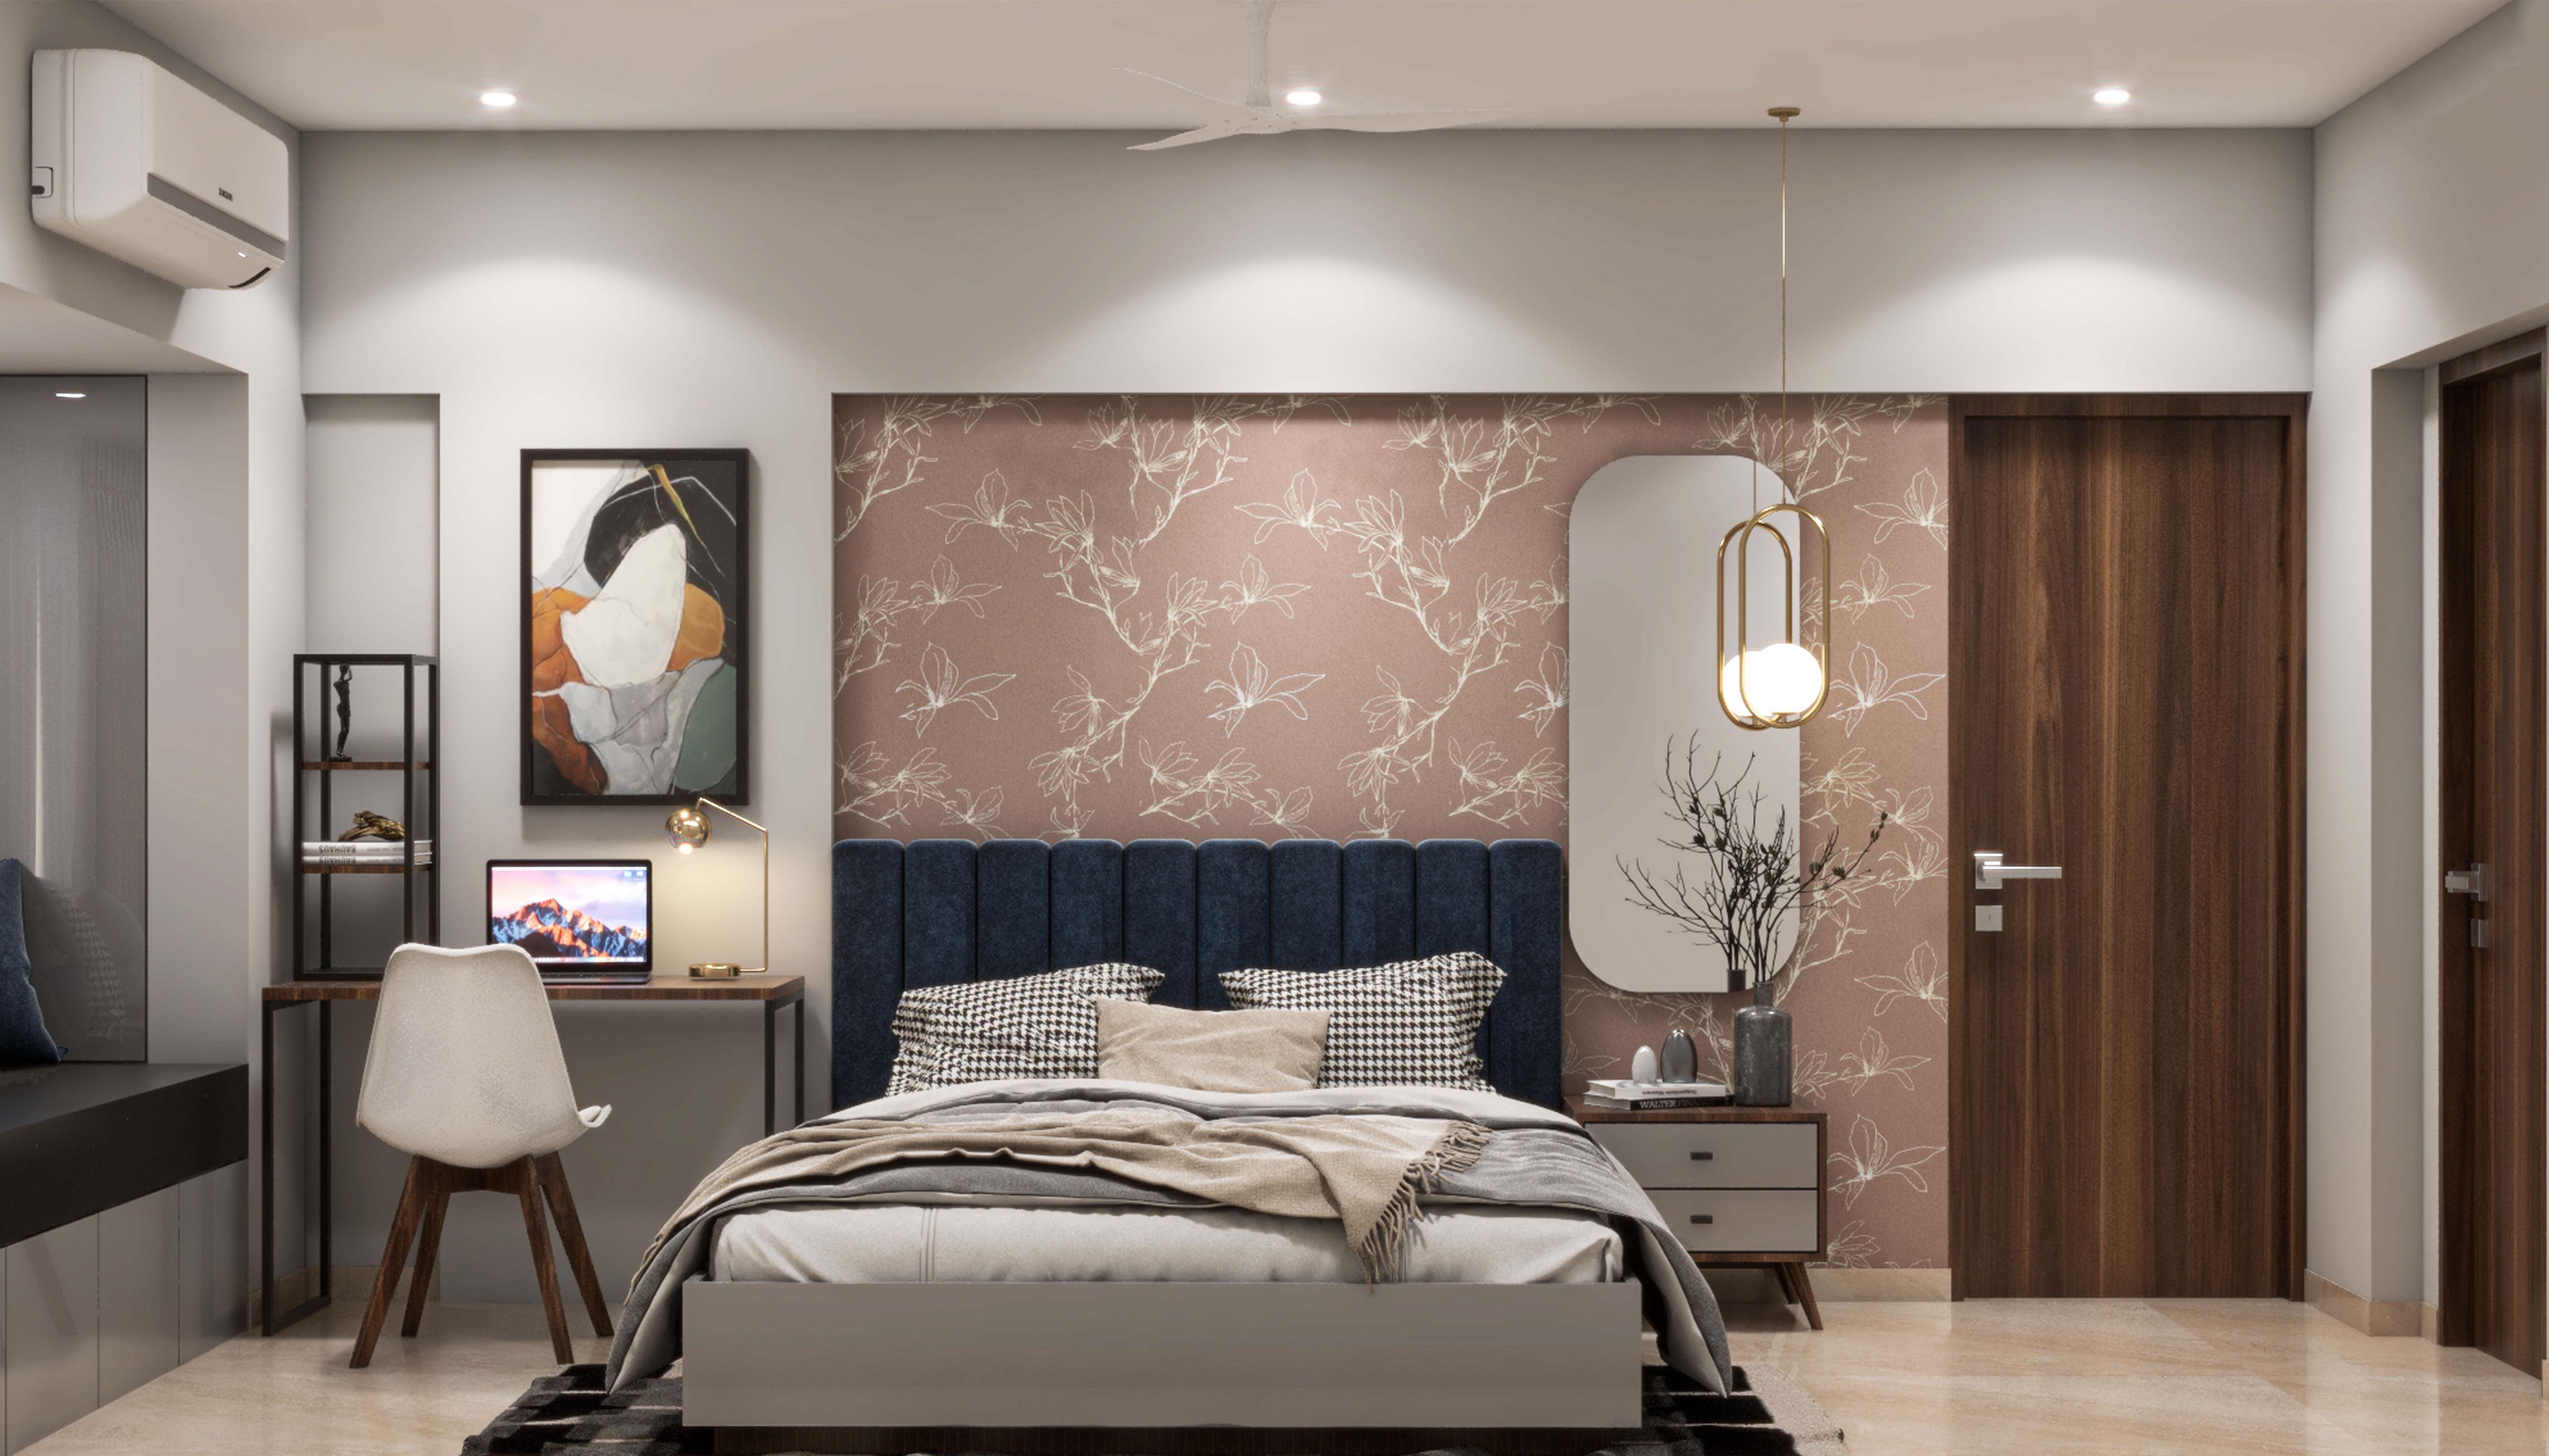 Contemporary Master Bedroom Design With Printed Wall Livspace